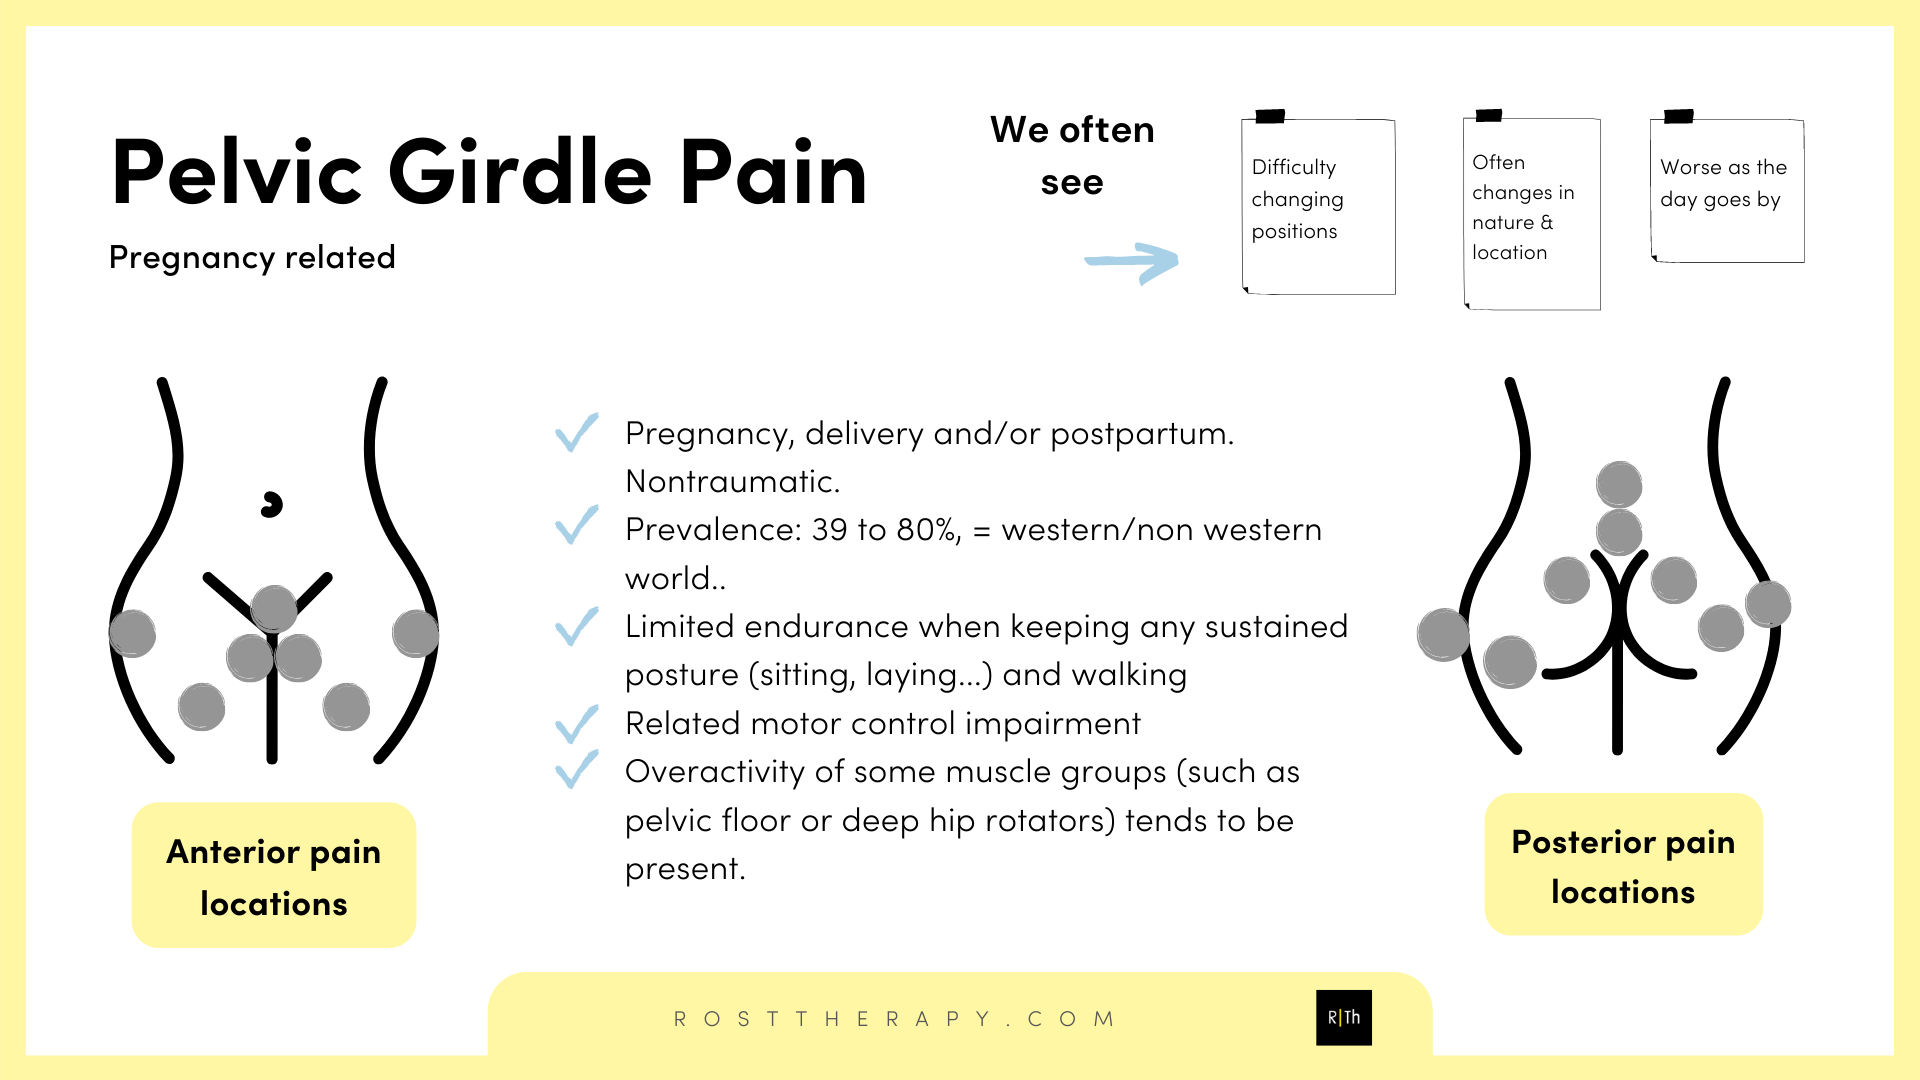 What Is Pelvic Girdle Pain? - Rost Therapy